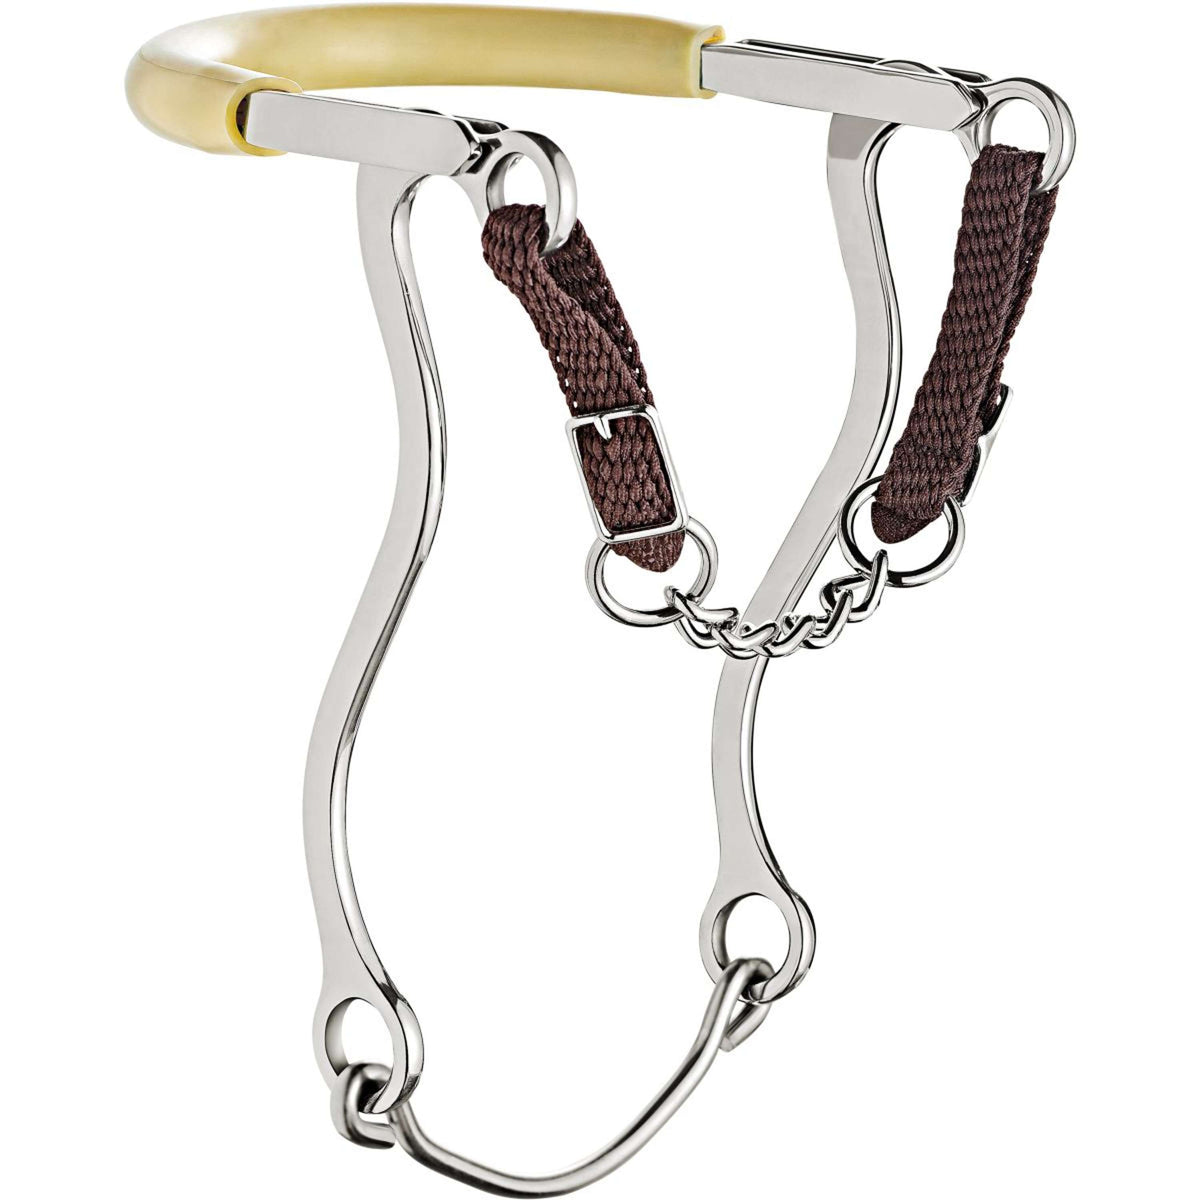 Sprenger Hackamore Stainless Steel Curb Chain